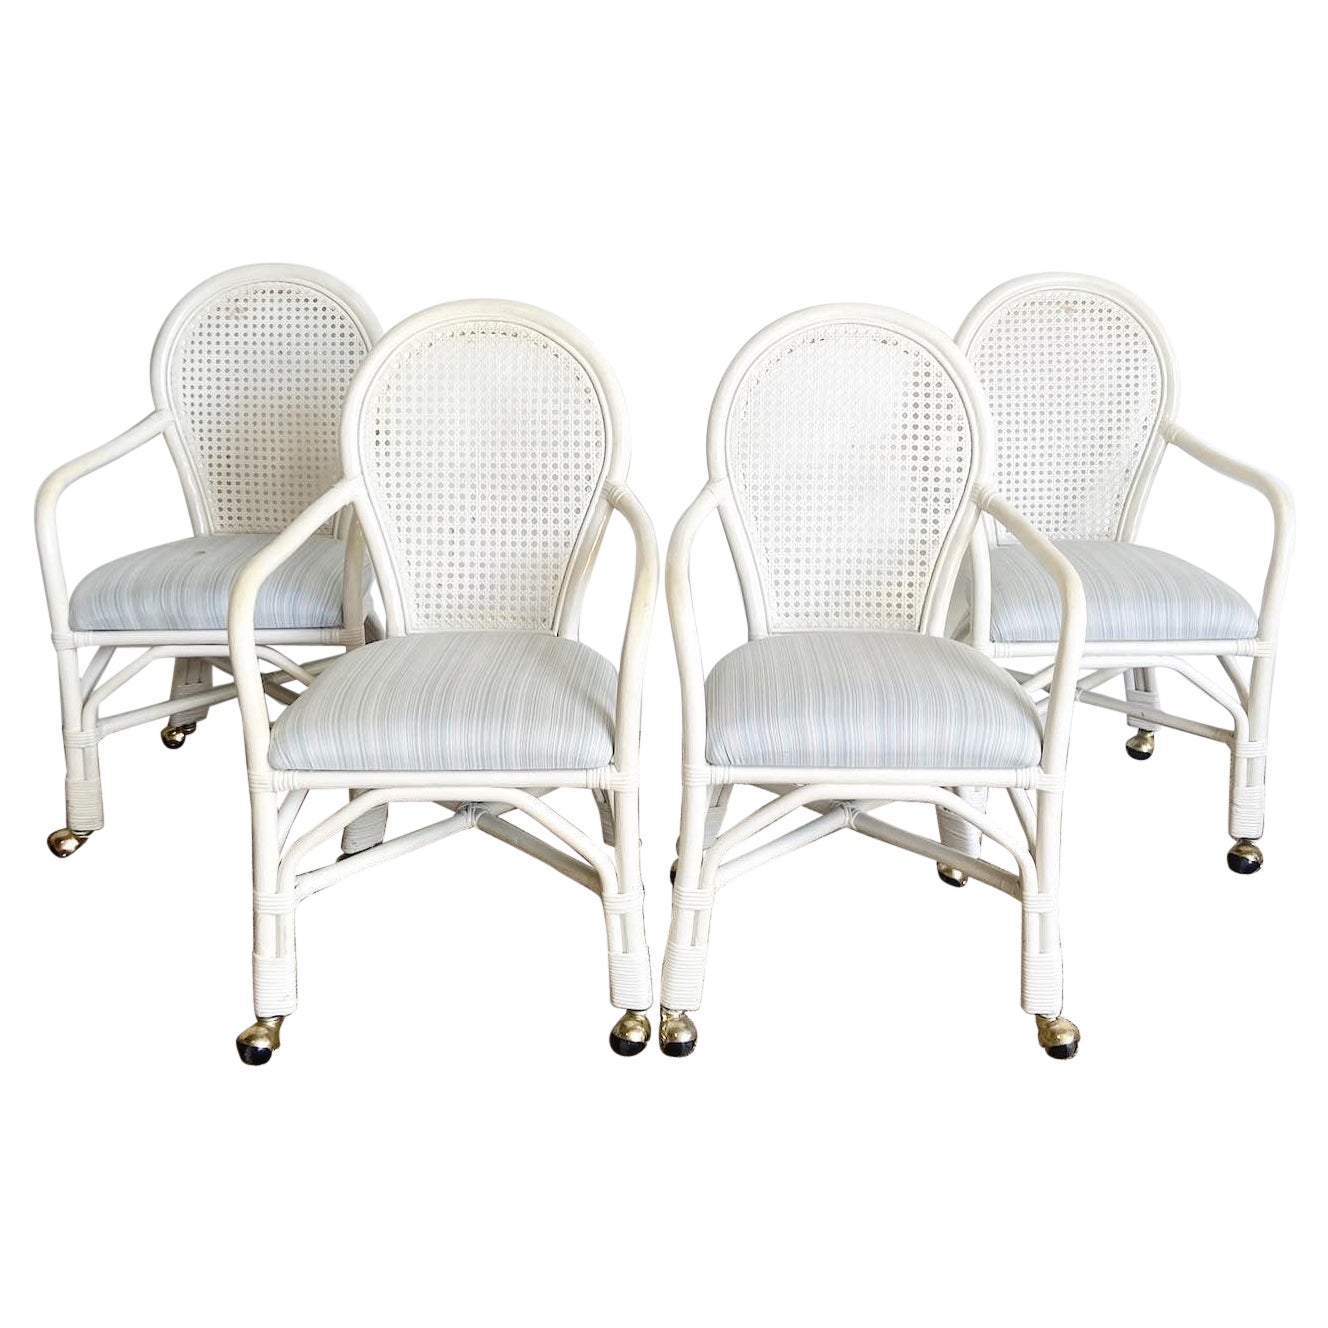 Regency White Cane Back Bamboo Rattan Dining Chairs on Casters - Set of 4 For Sale